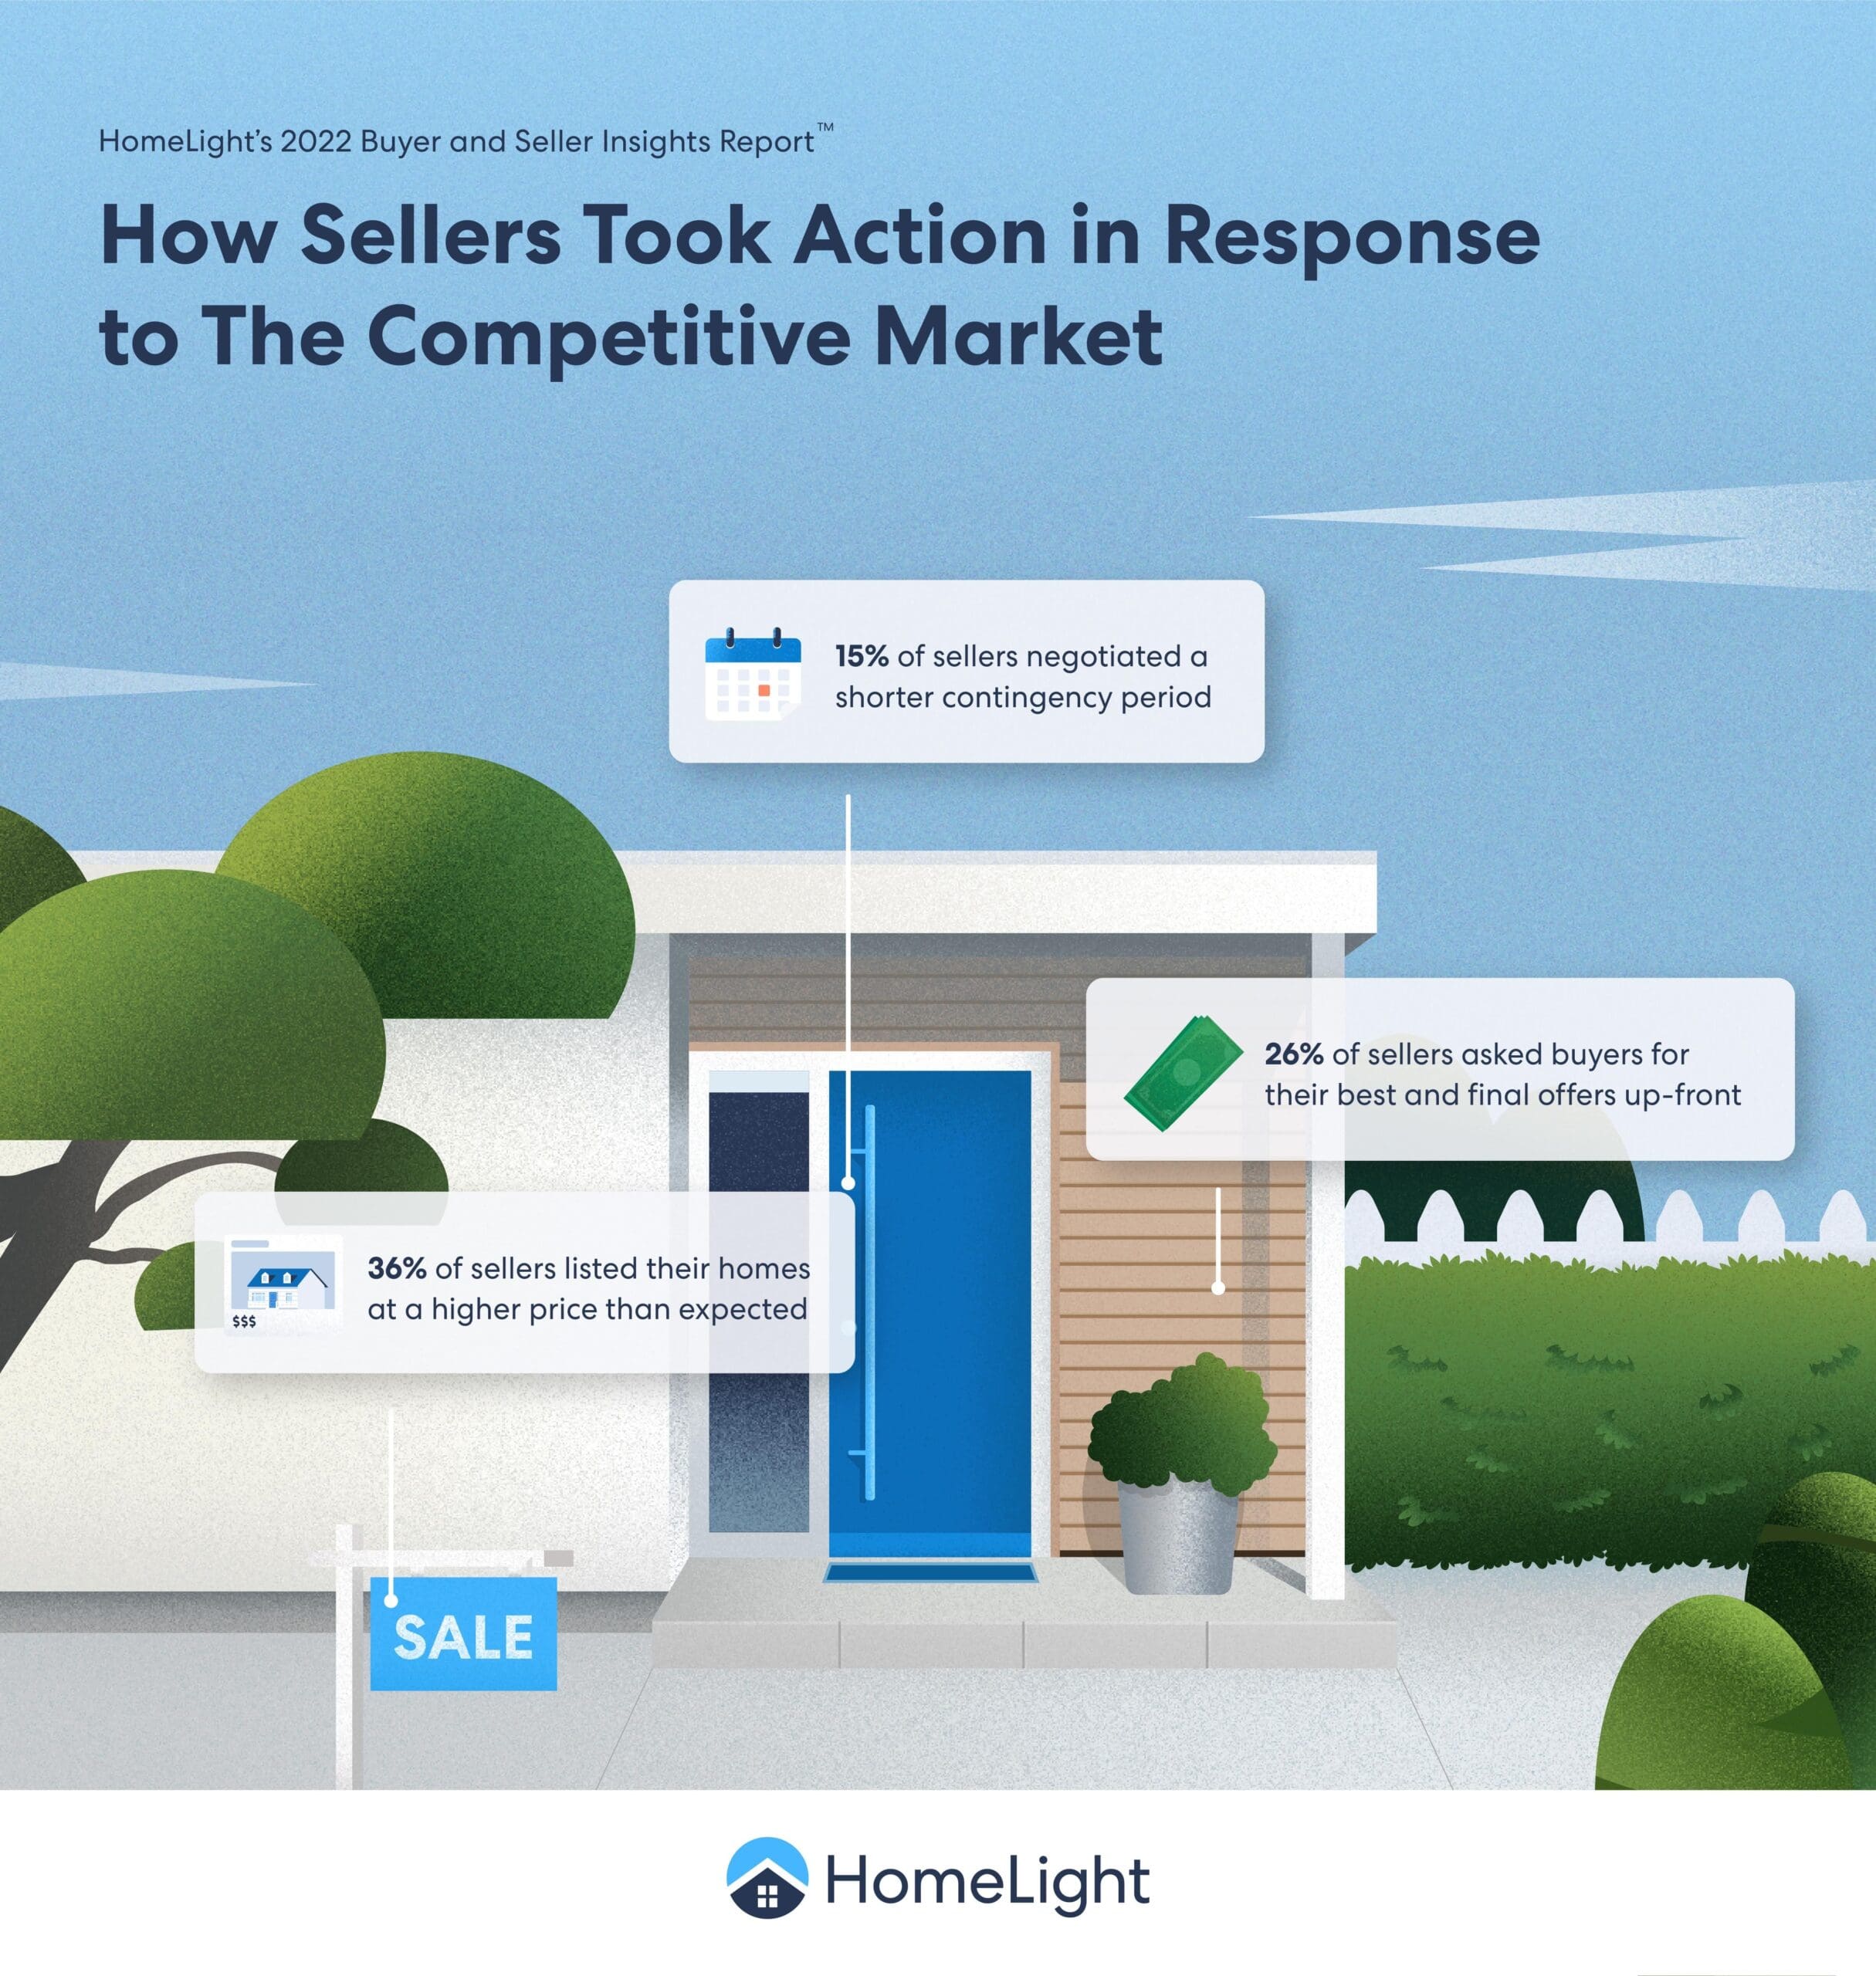 How Sellers Took Action in Response to The Competitive Market